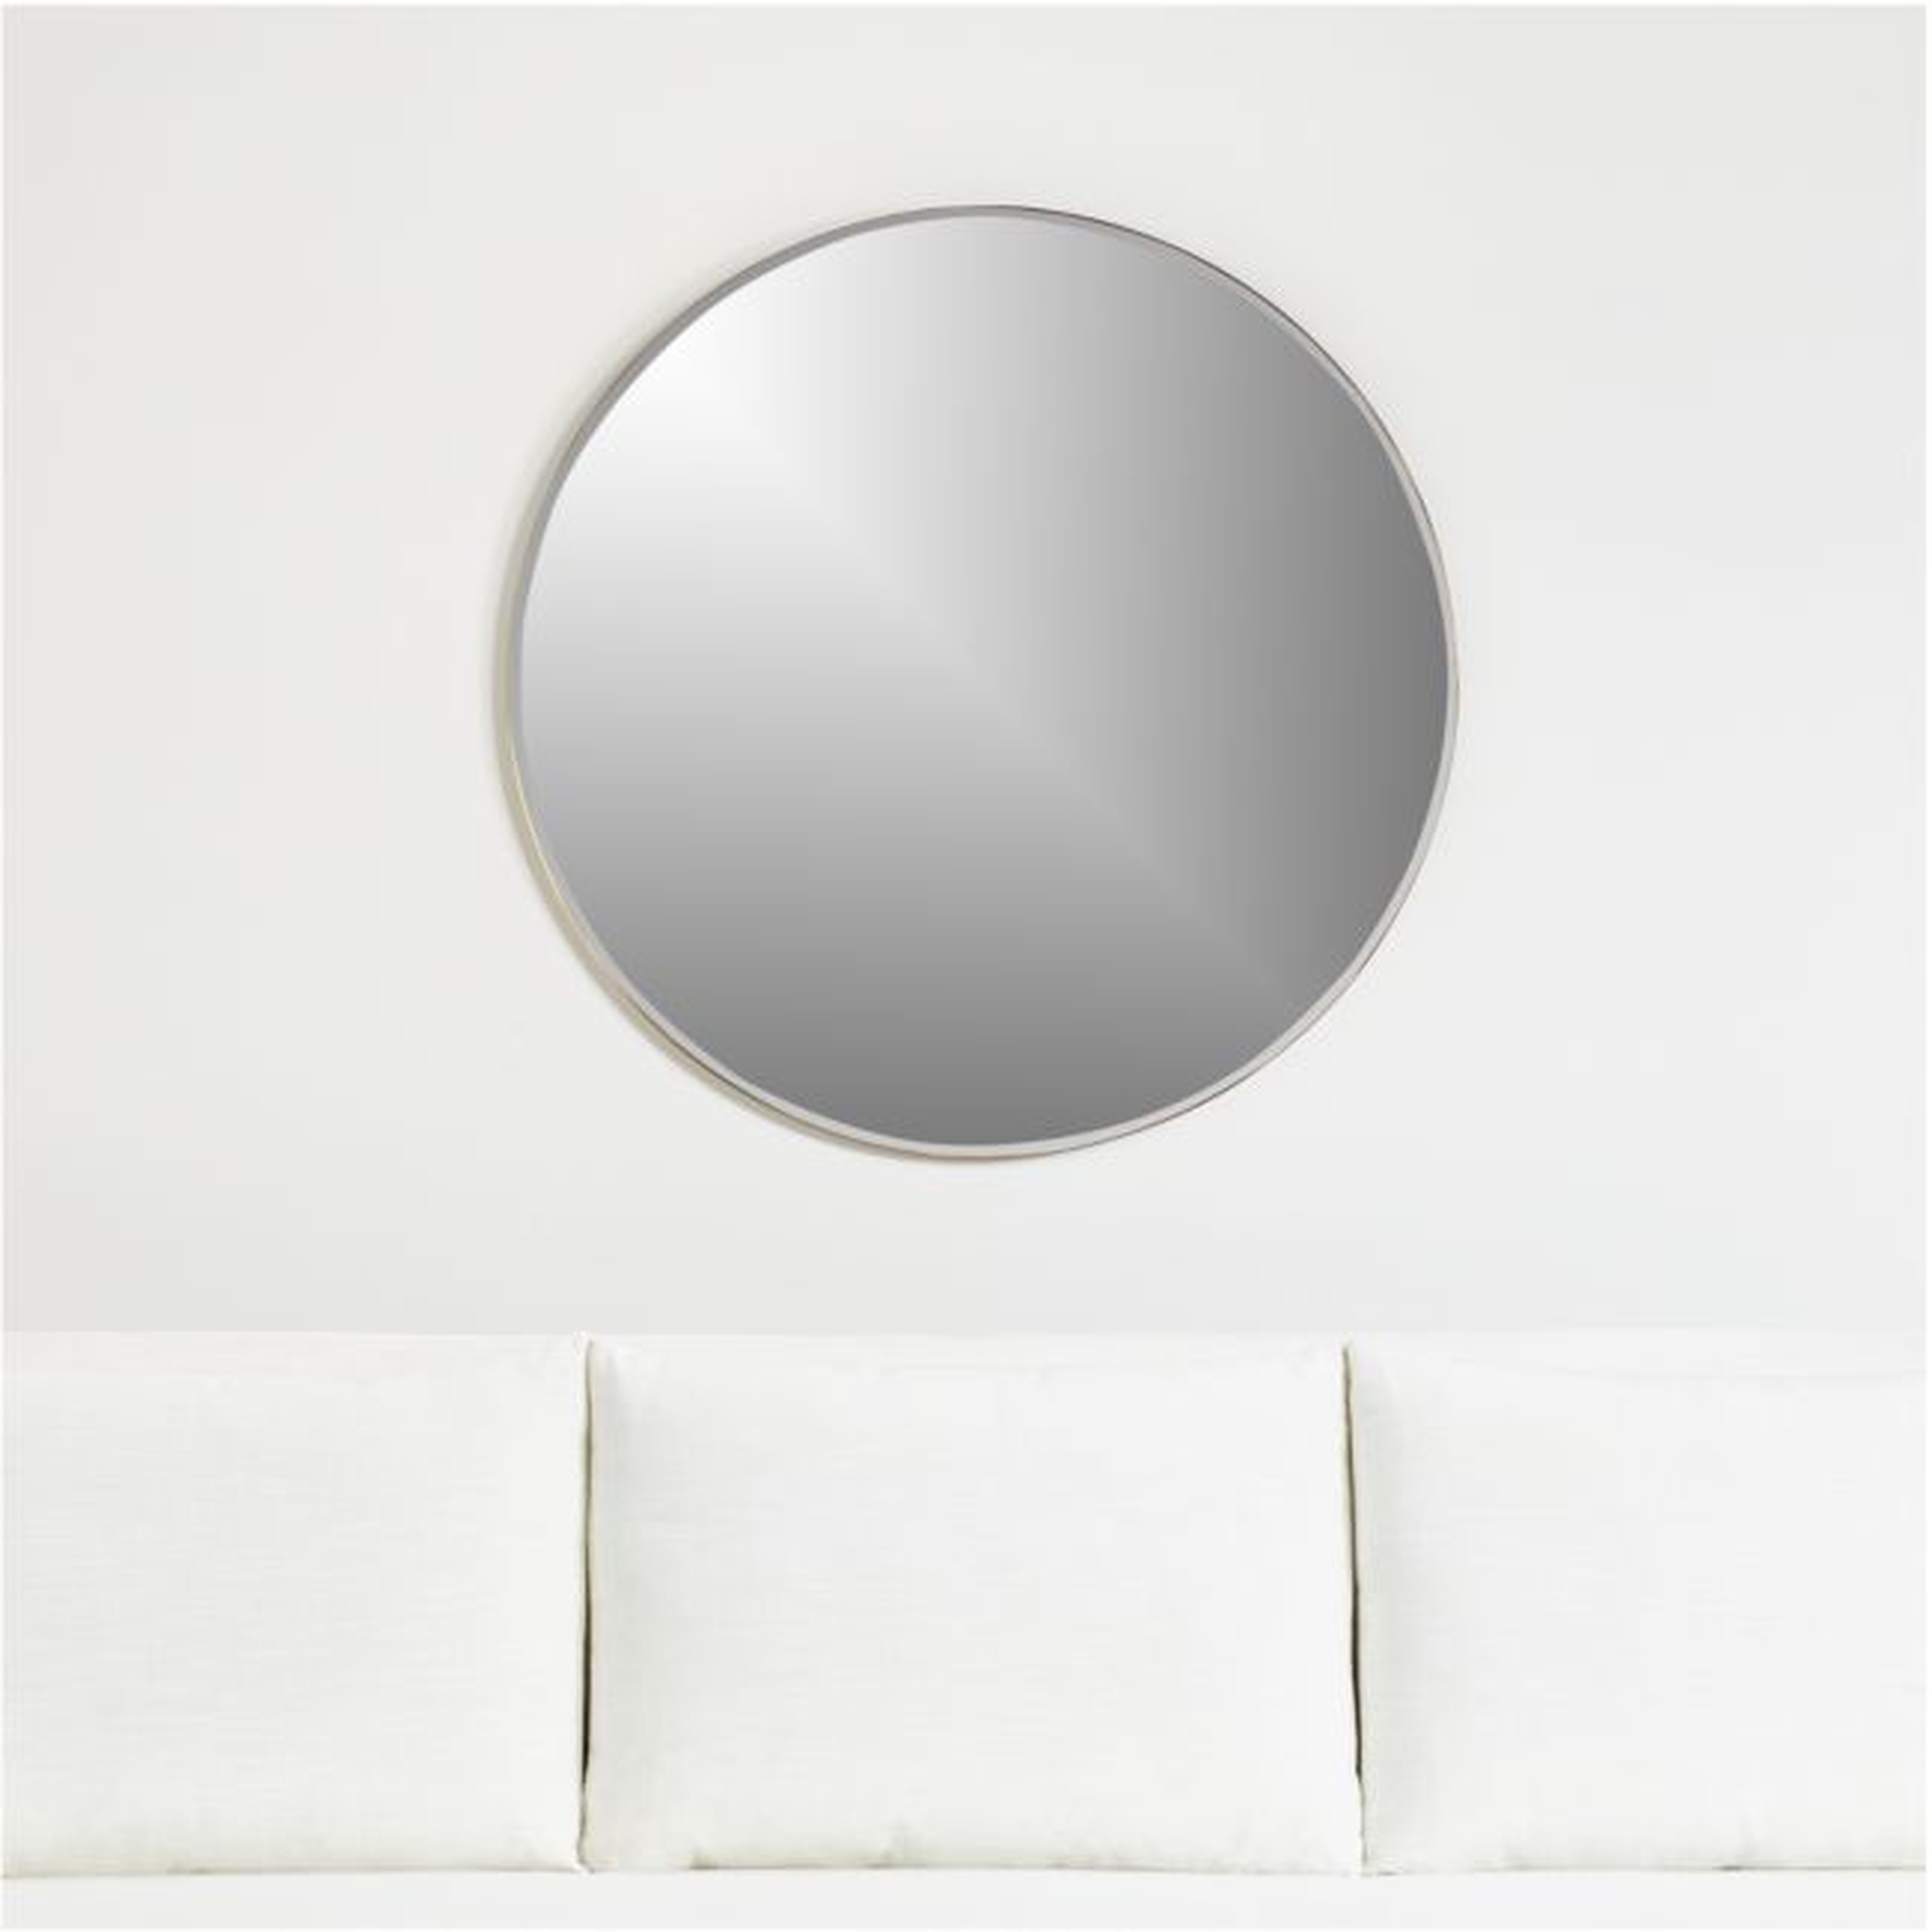 Edge Brass 36" Round Wall Mirror - Crate and Barrel